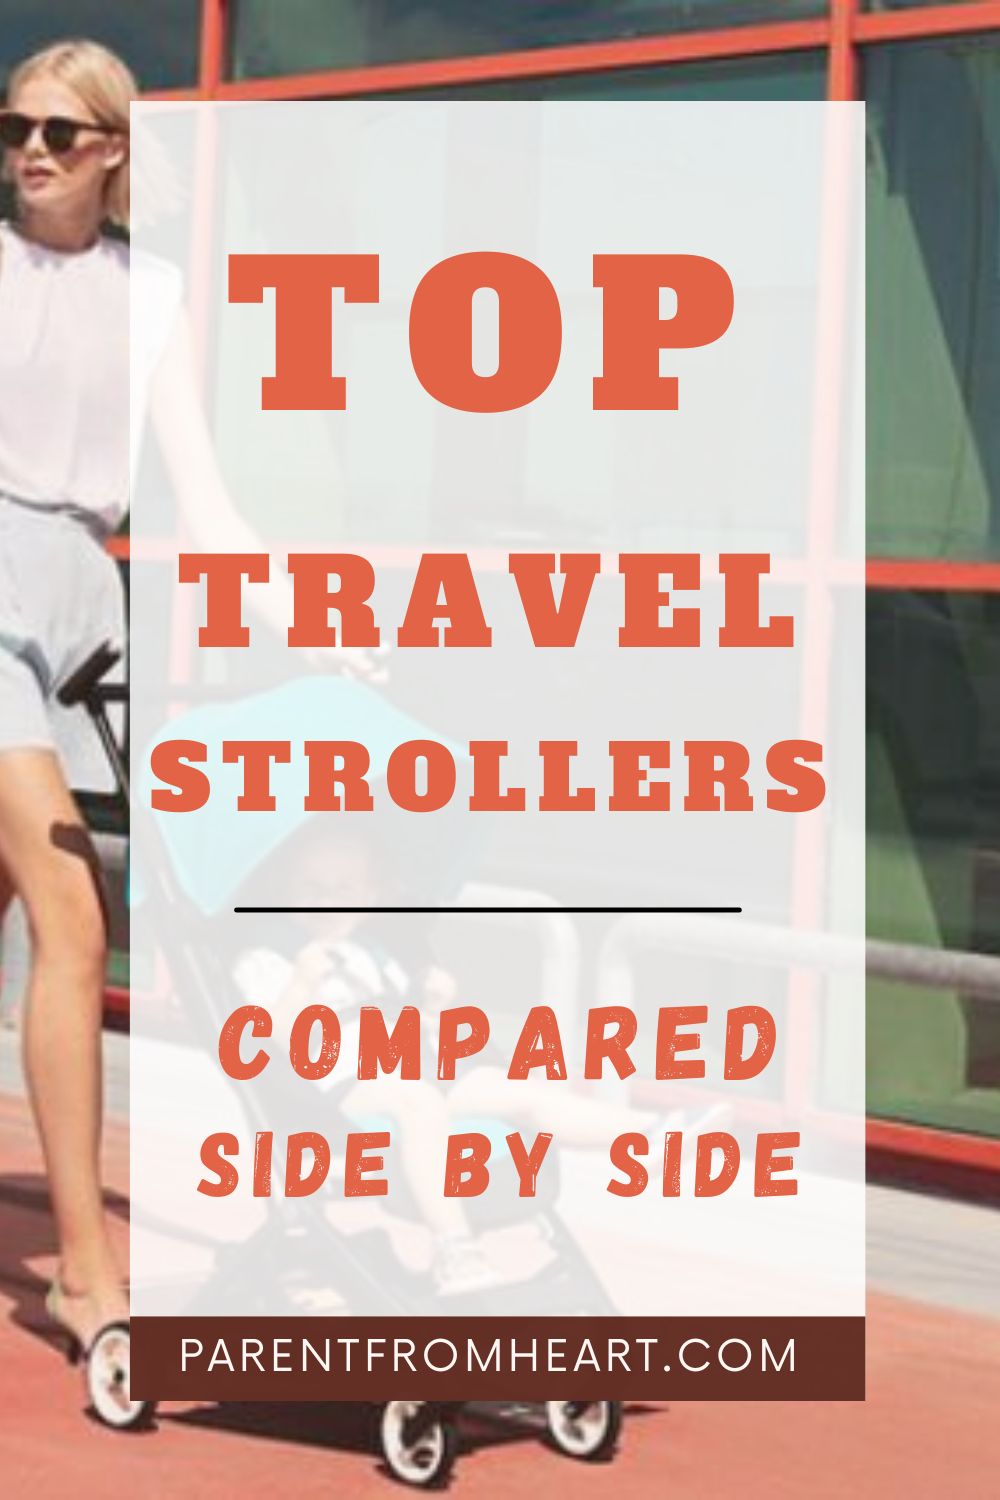 Top Travel Strollers Compared Side by Side